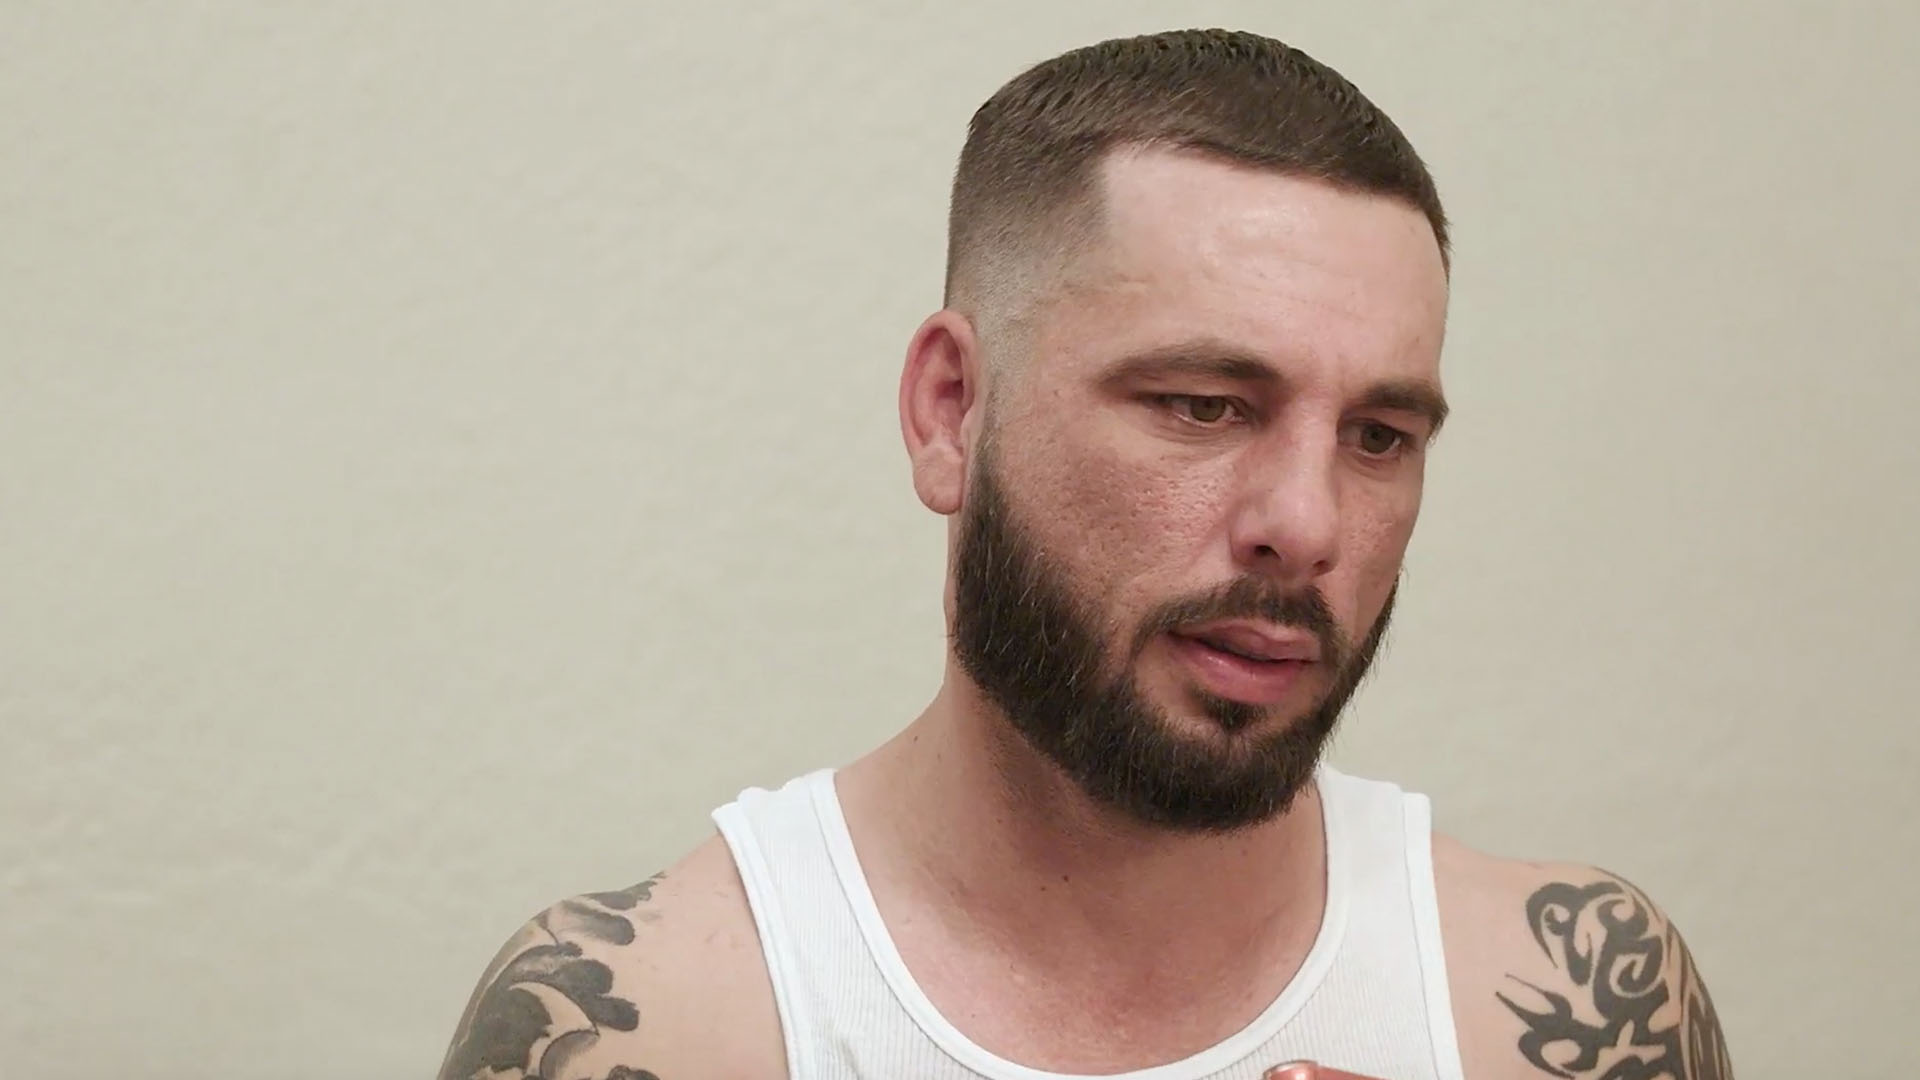 Watch Sneak Peek: Is Kevin Being Led On By Tiffany? | Love After Lockup Video Extras